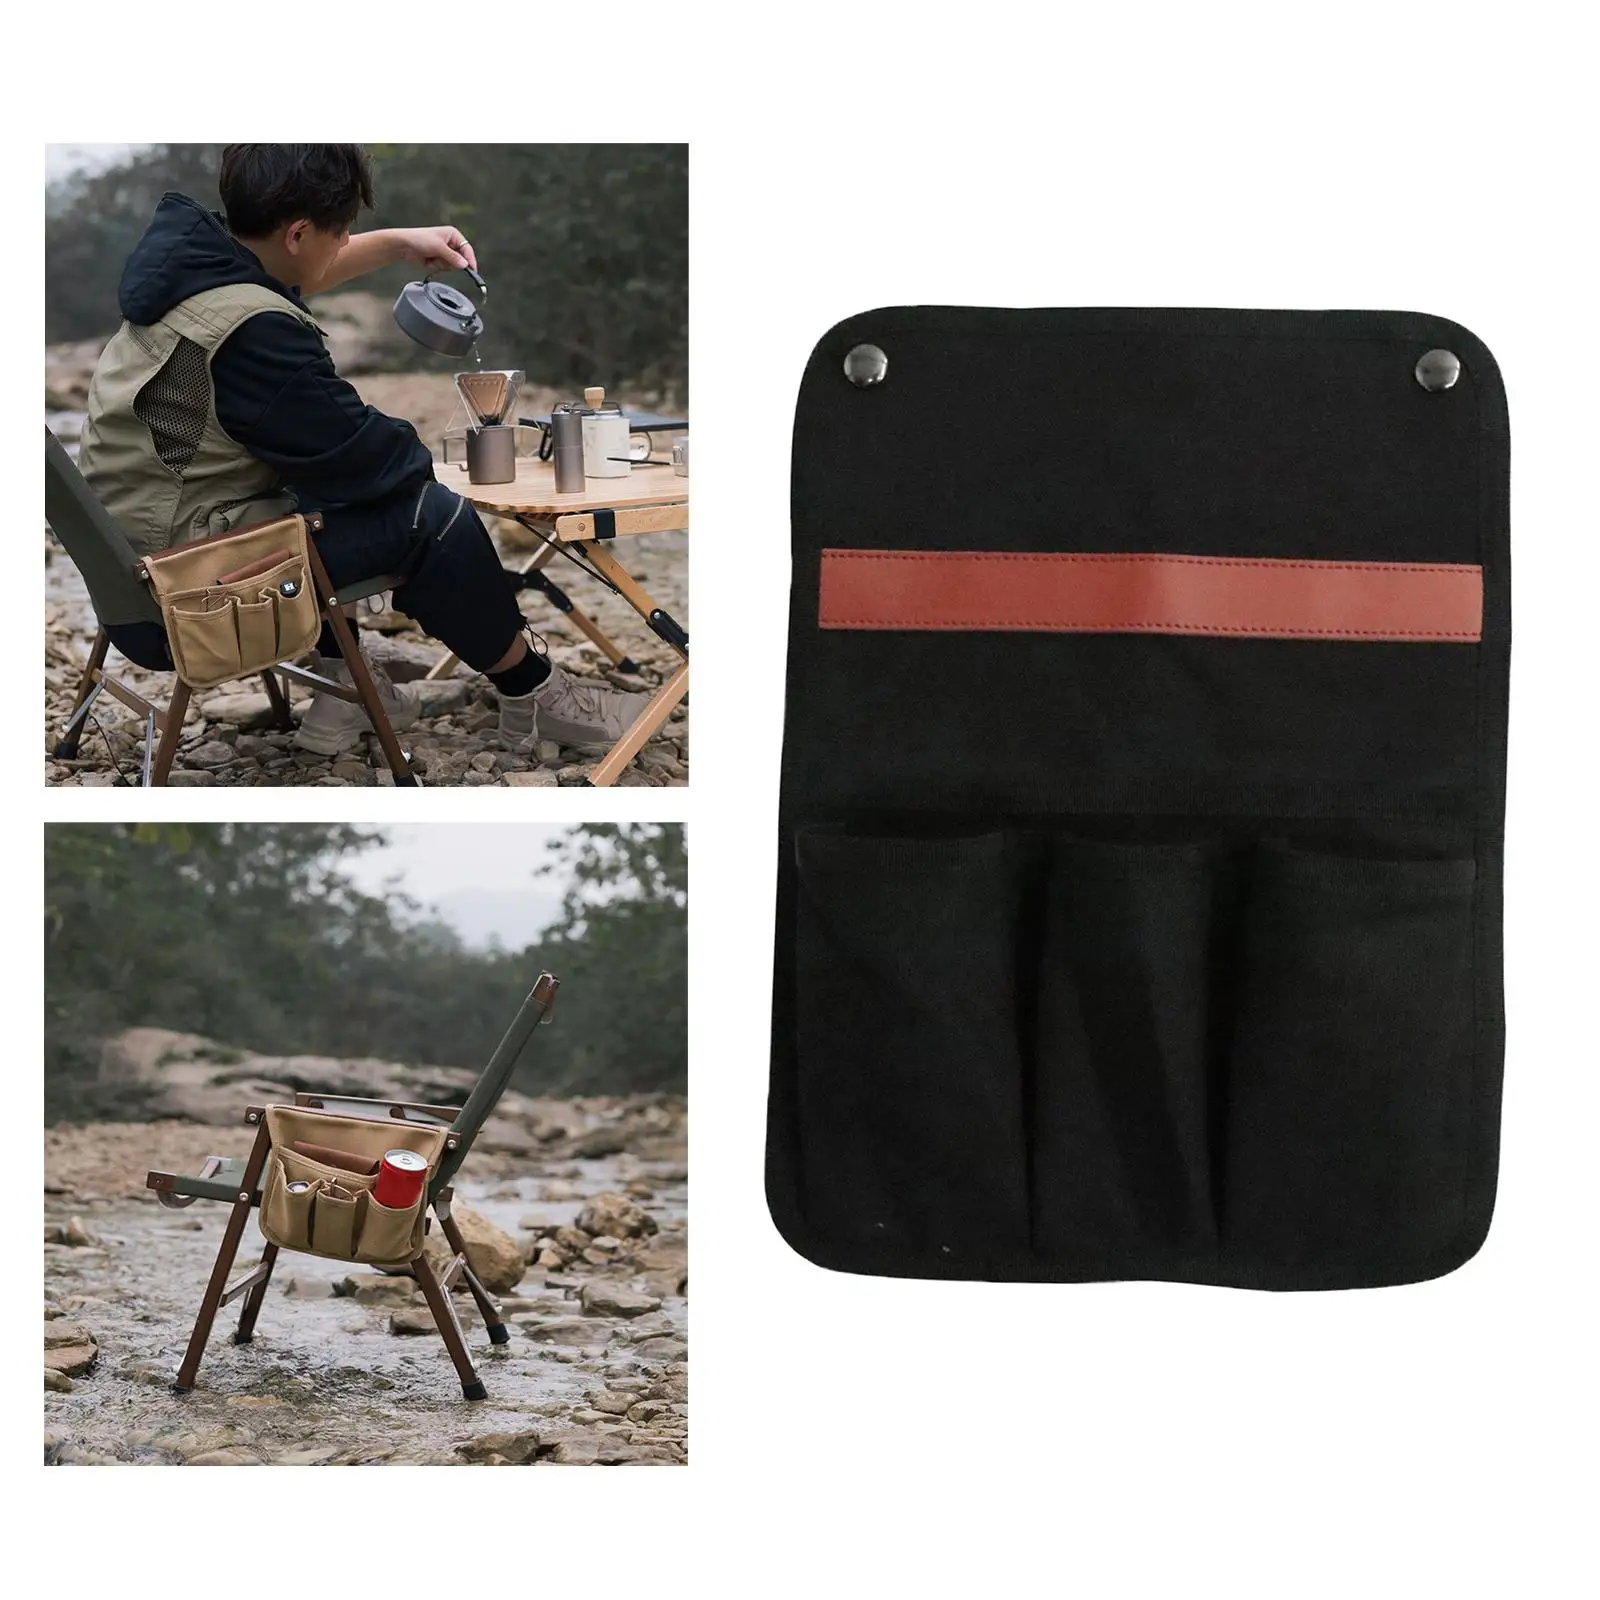 Portable Sofa Chair Arm Rest Pocket Storage Tray 4 Ports Couch Bag Food Holder Tray Phone Key Holder Tote Bag for Fishing